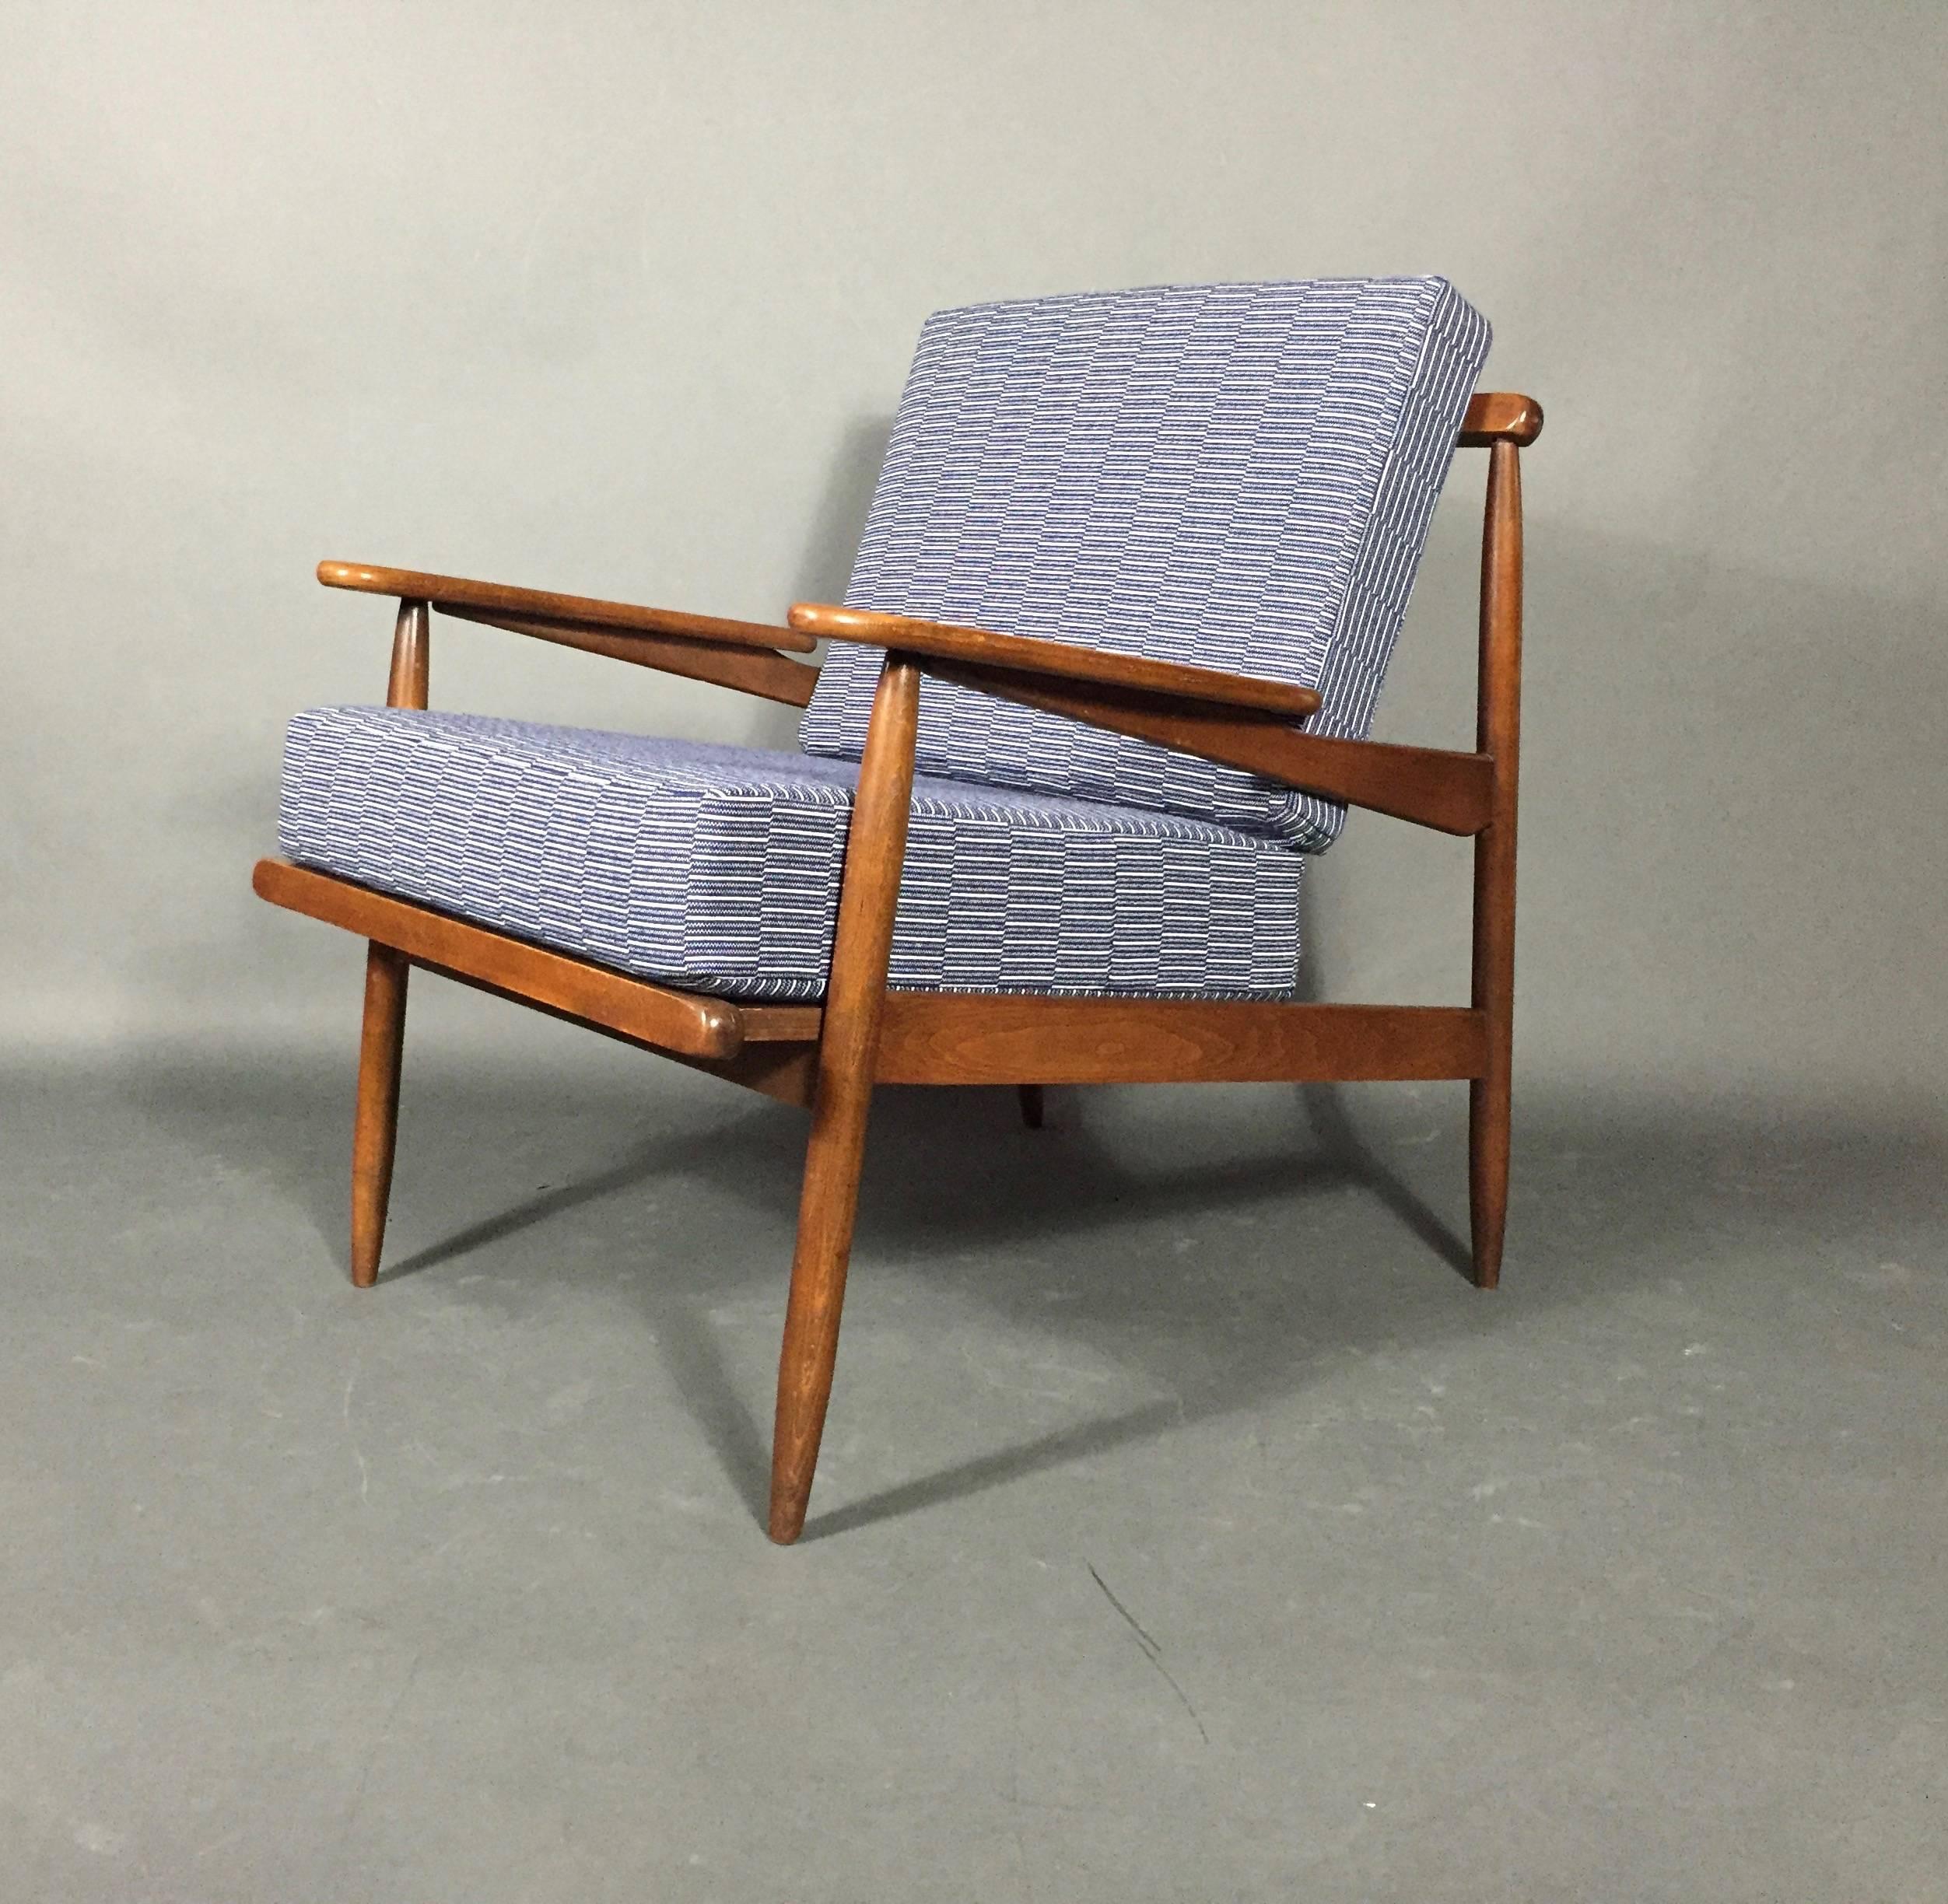 Mid-20th Century 1950s American Modern Walnut Lounge Chair, Eleanor Pritchard Cover